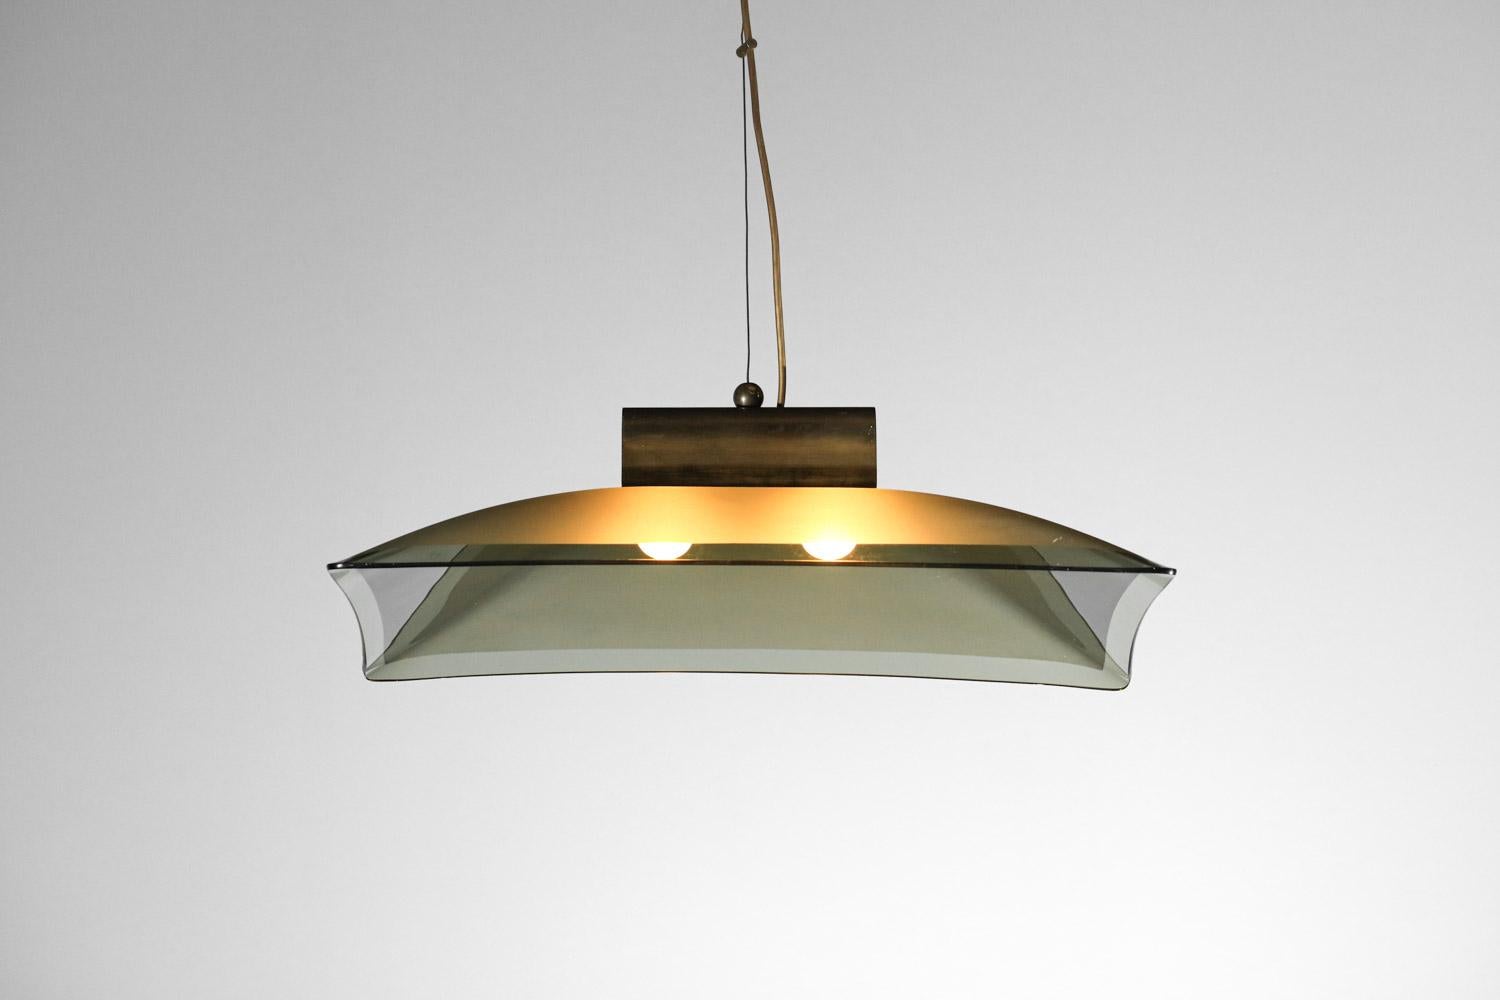 Italian rectangular glass suspension attributed to Fontana Arte - H138
Italian suspension lamp from the 60s attributed to Fontana Arte. Solid brass suspension base and large rectangular grey frosted glass shade. Very fine vintage condition with a